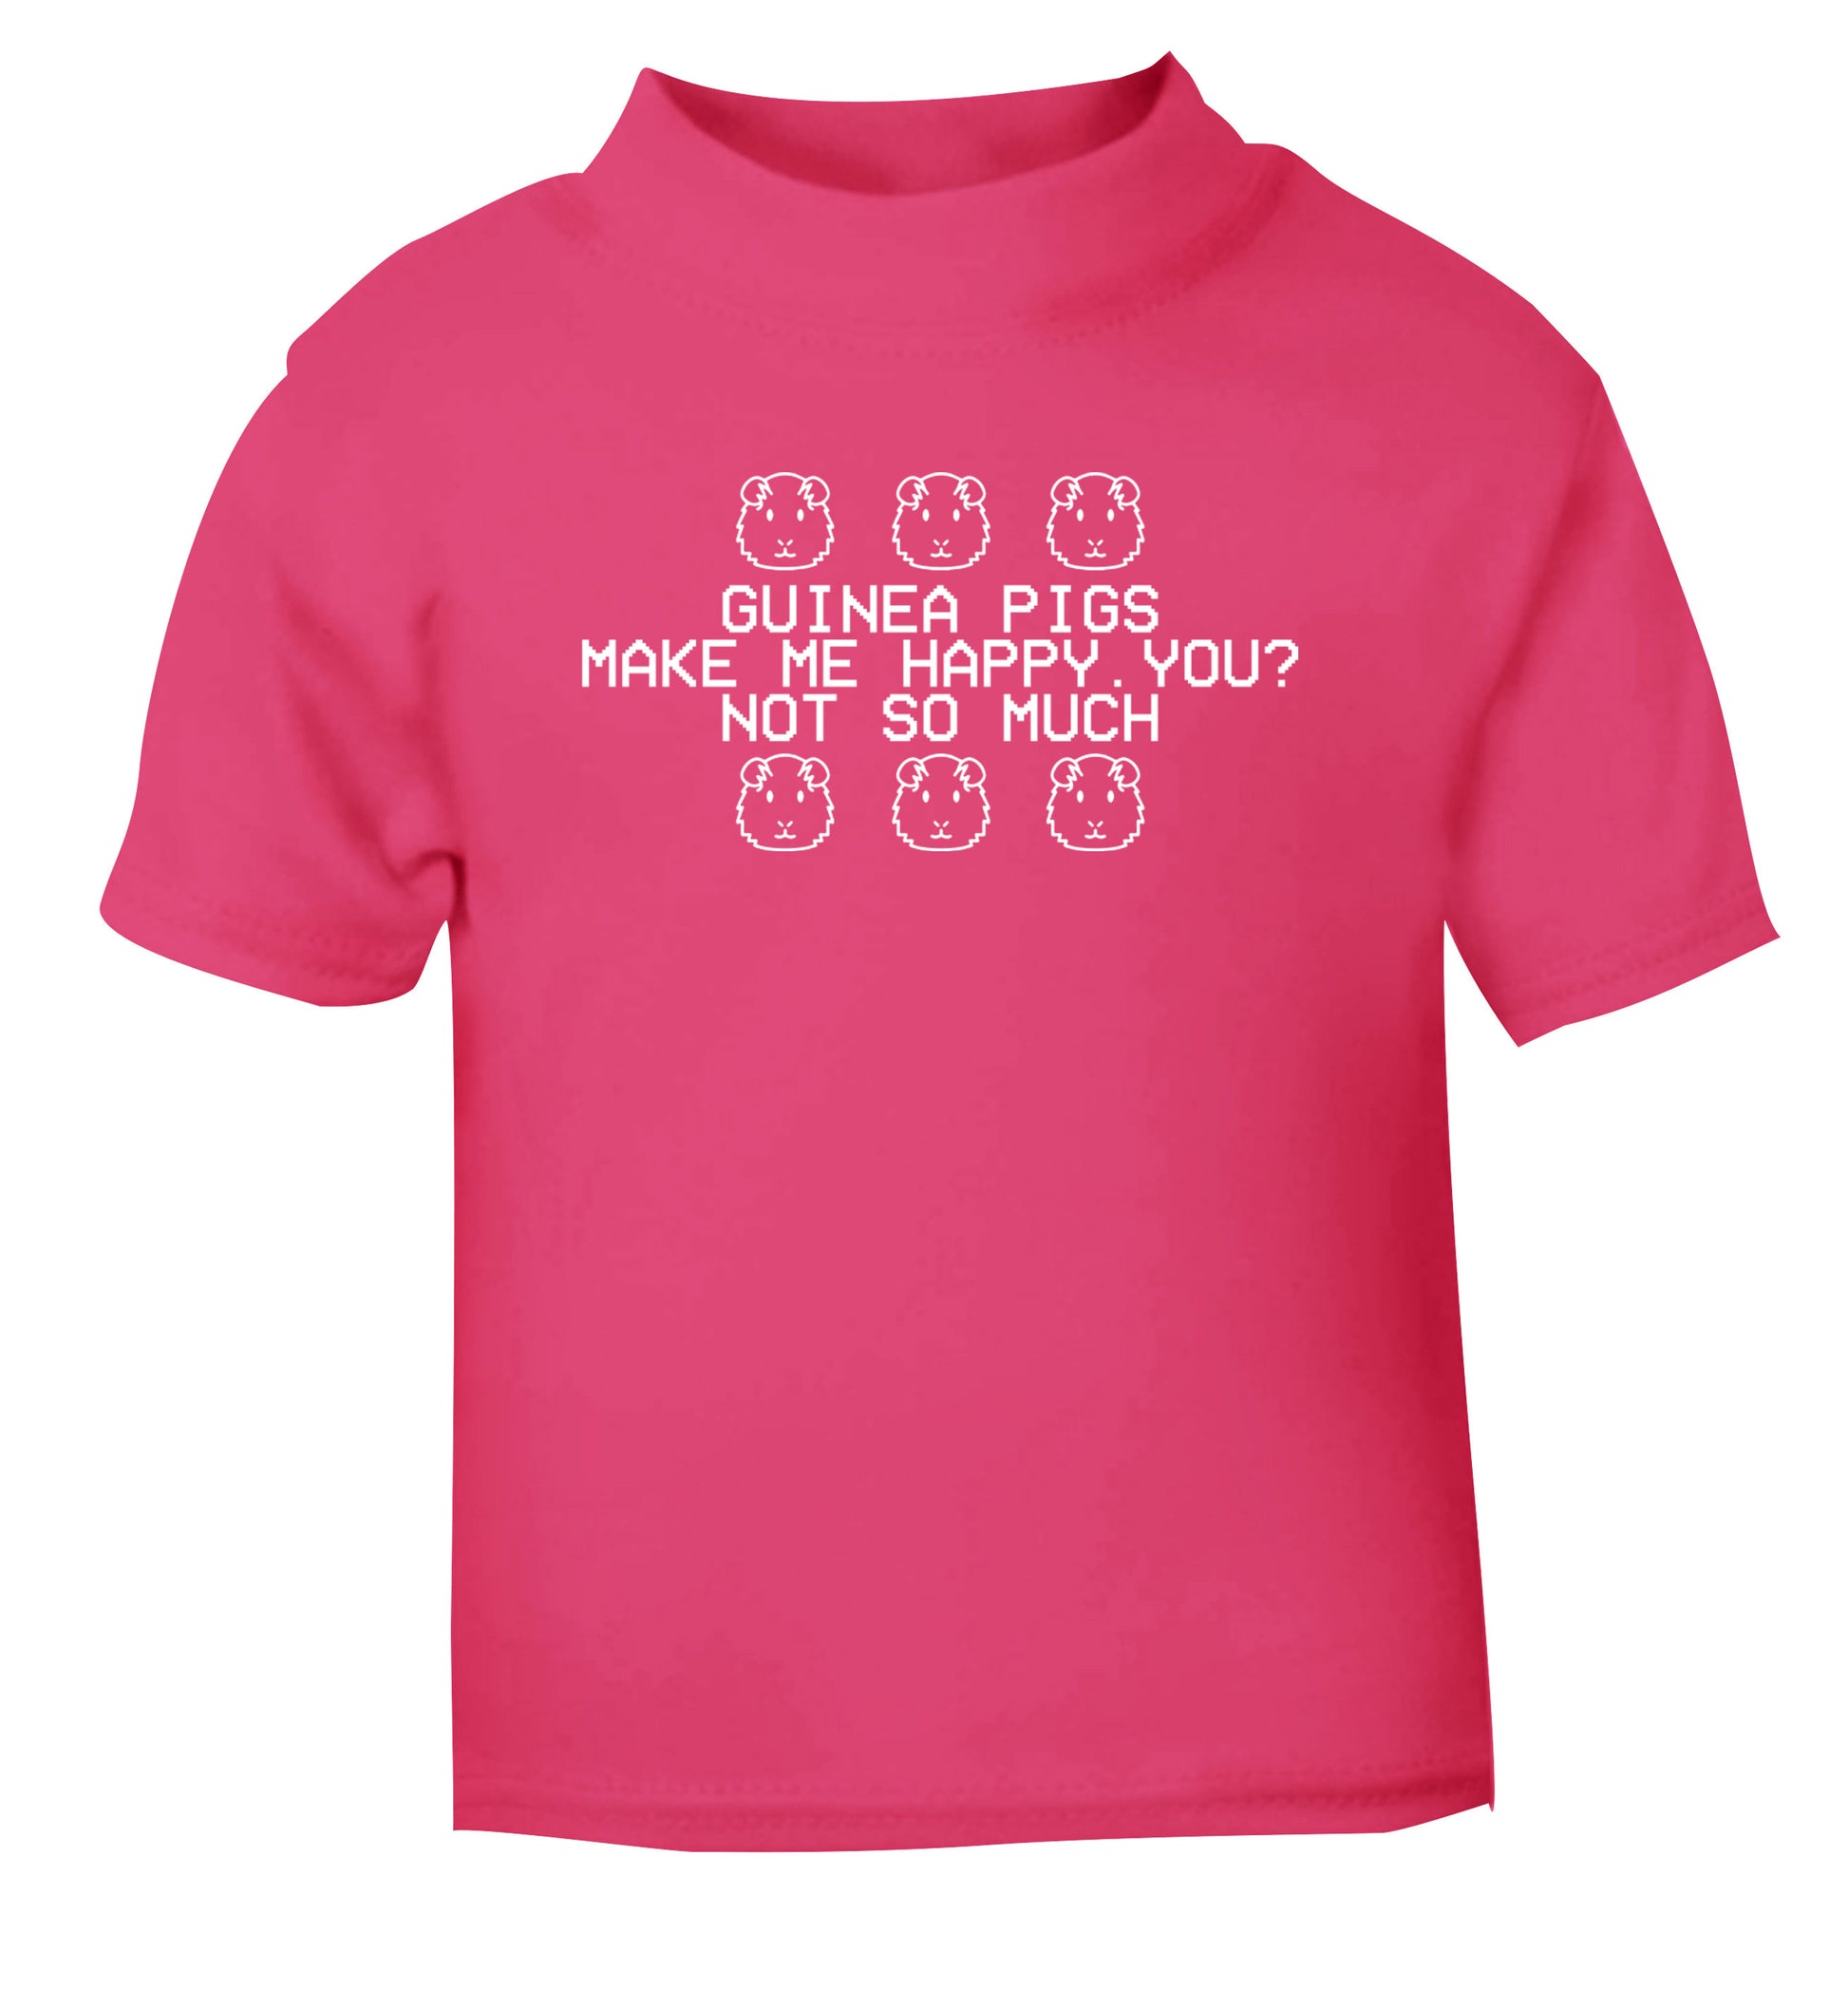 Guinea pigs make me happy, you not so much pink Baby Toddler Tshirt 2 Years